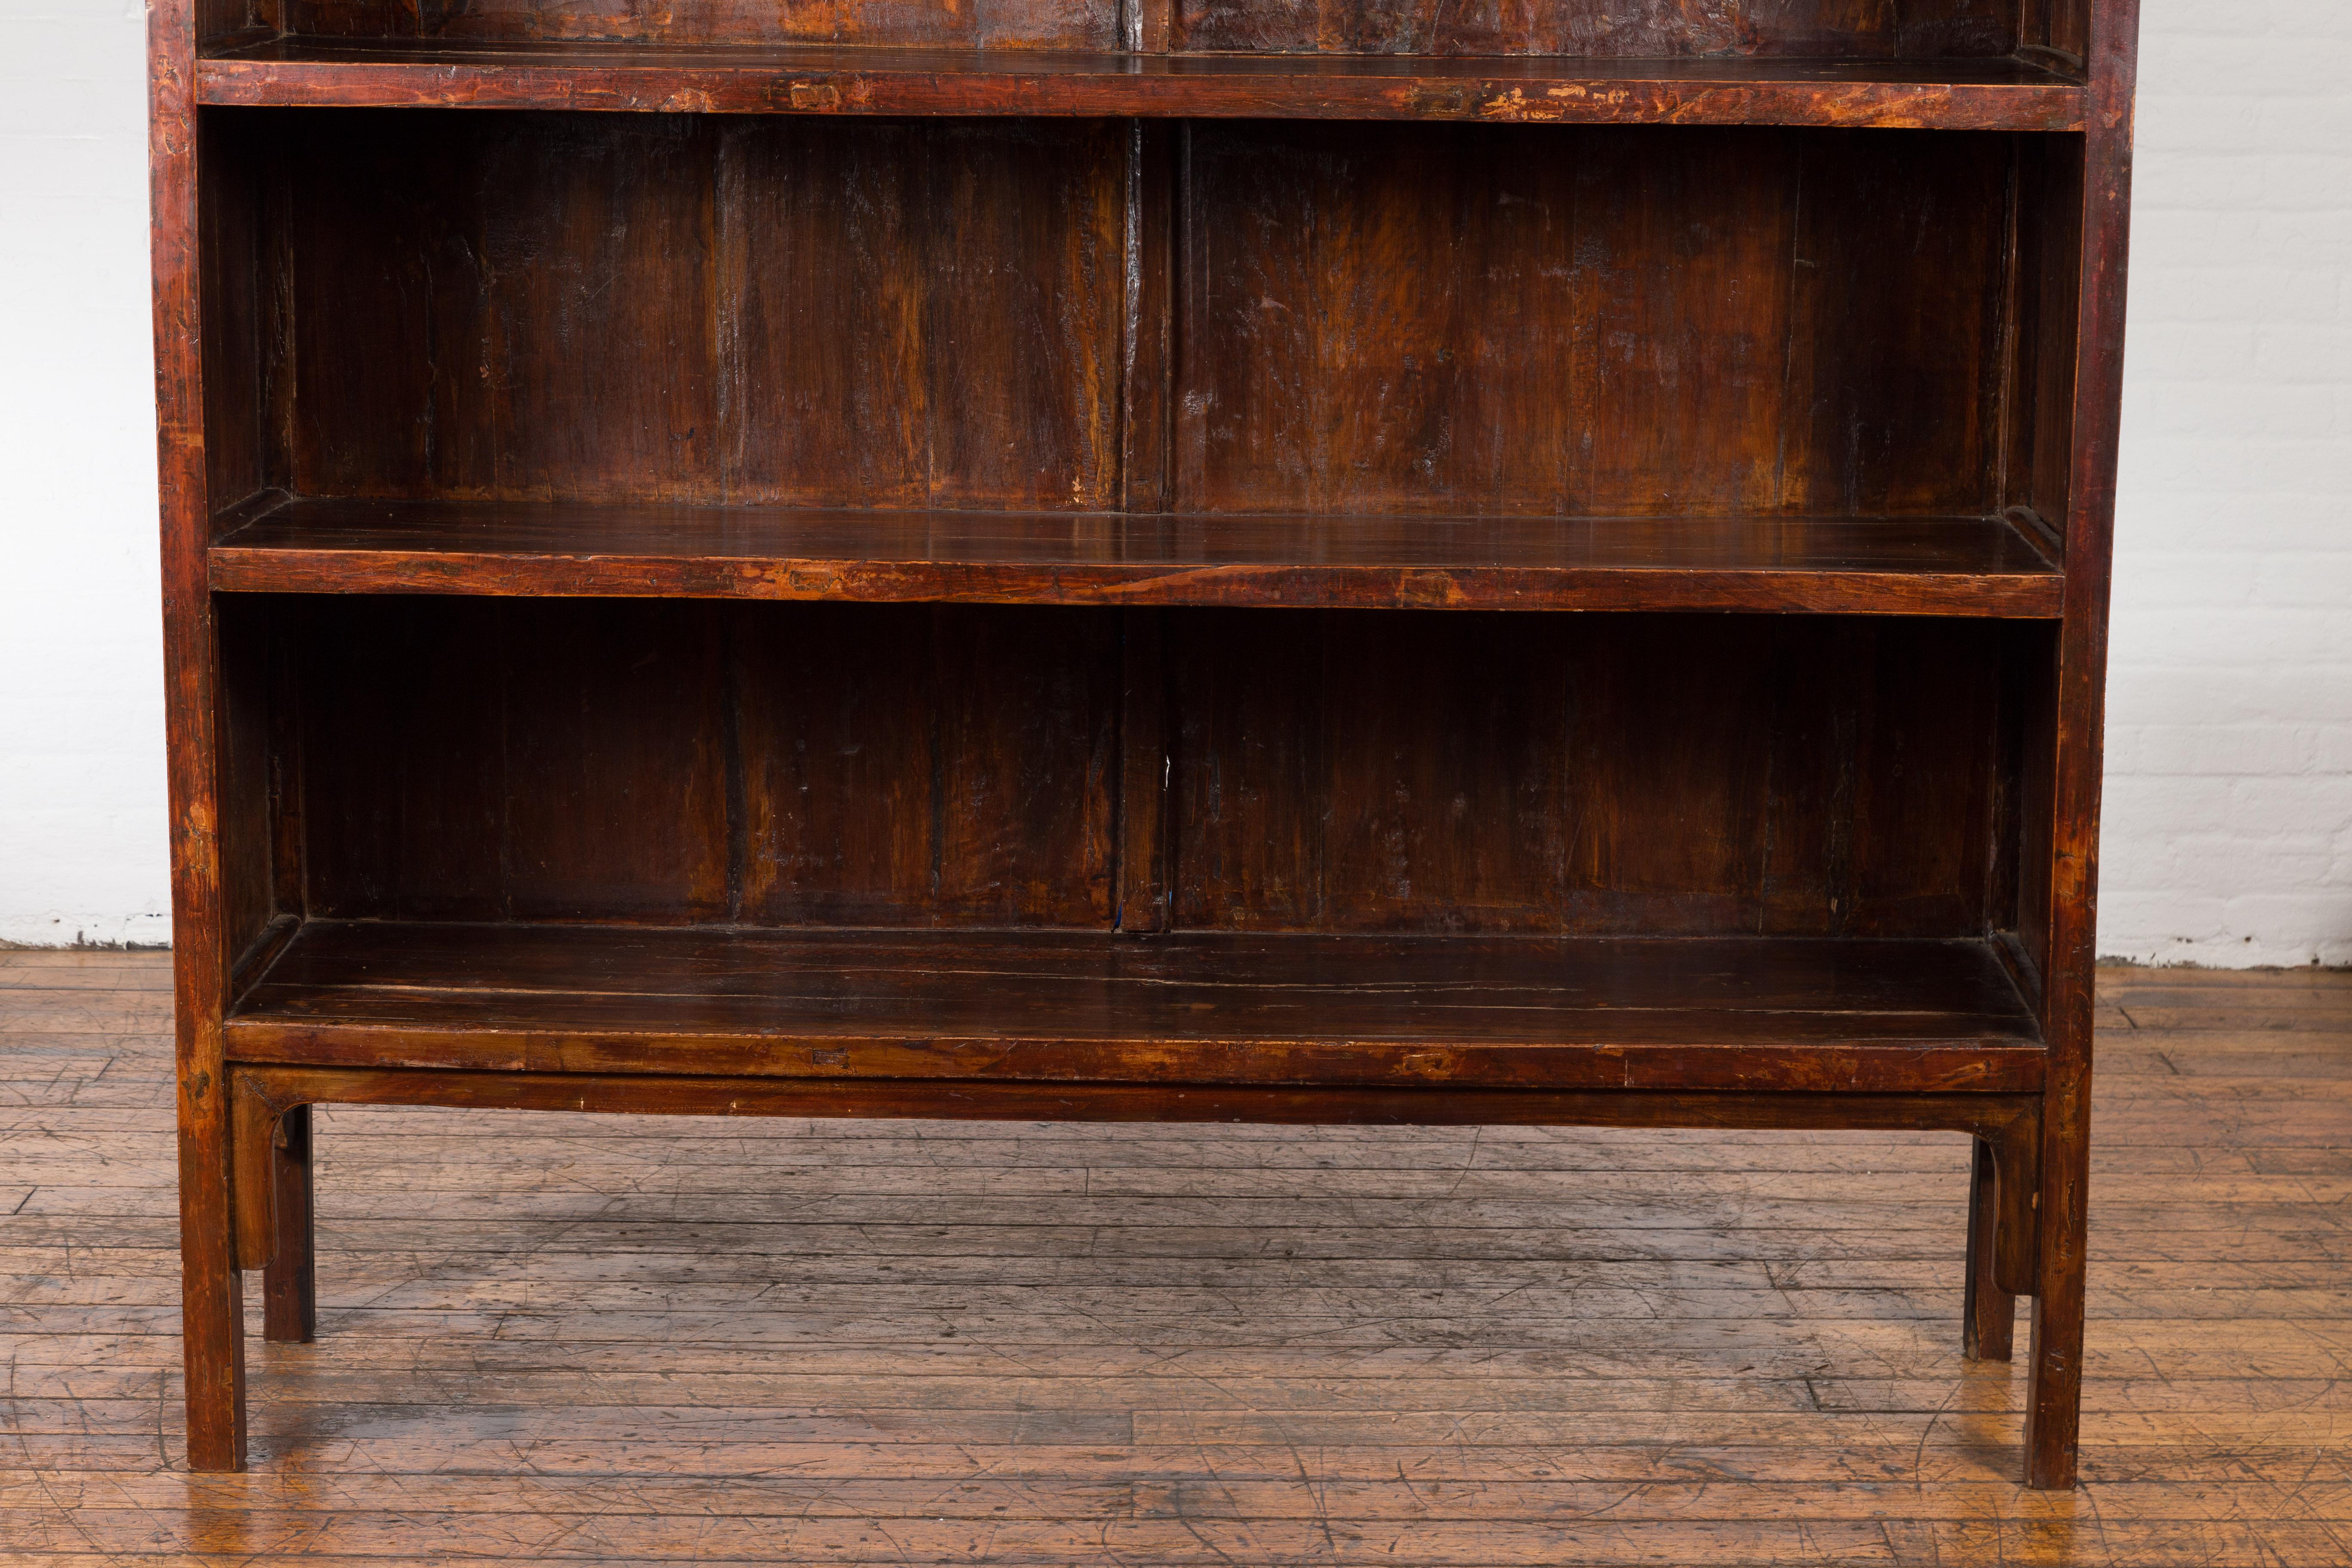 Chinese Qing Dynasty 19th Century Bookcase with Four Shelves and Dark Patina For Sale 3